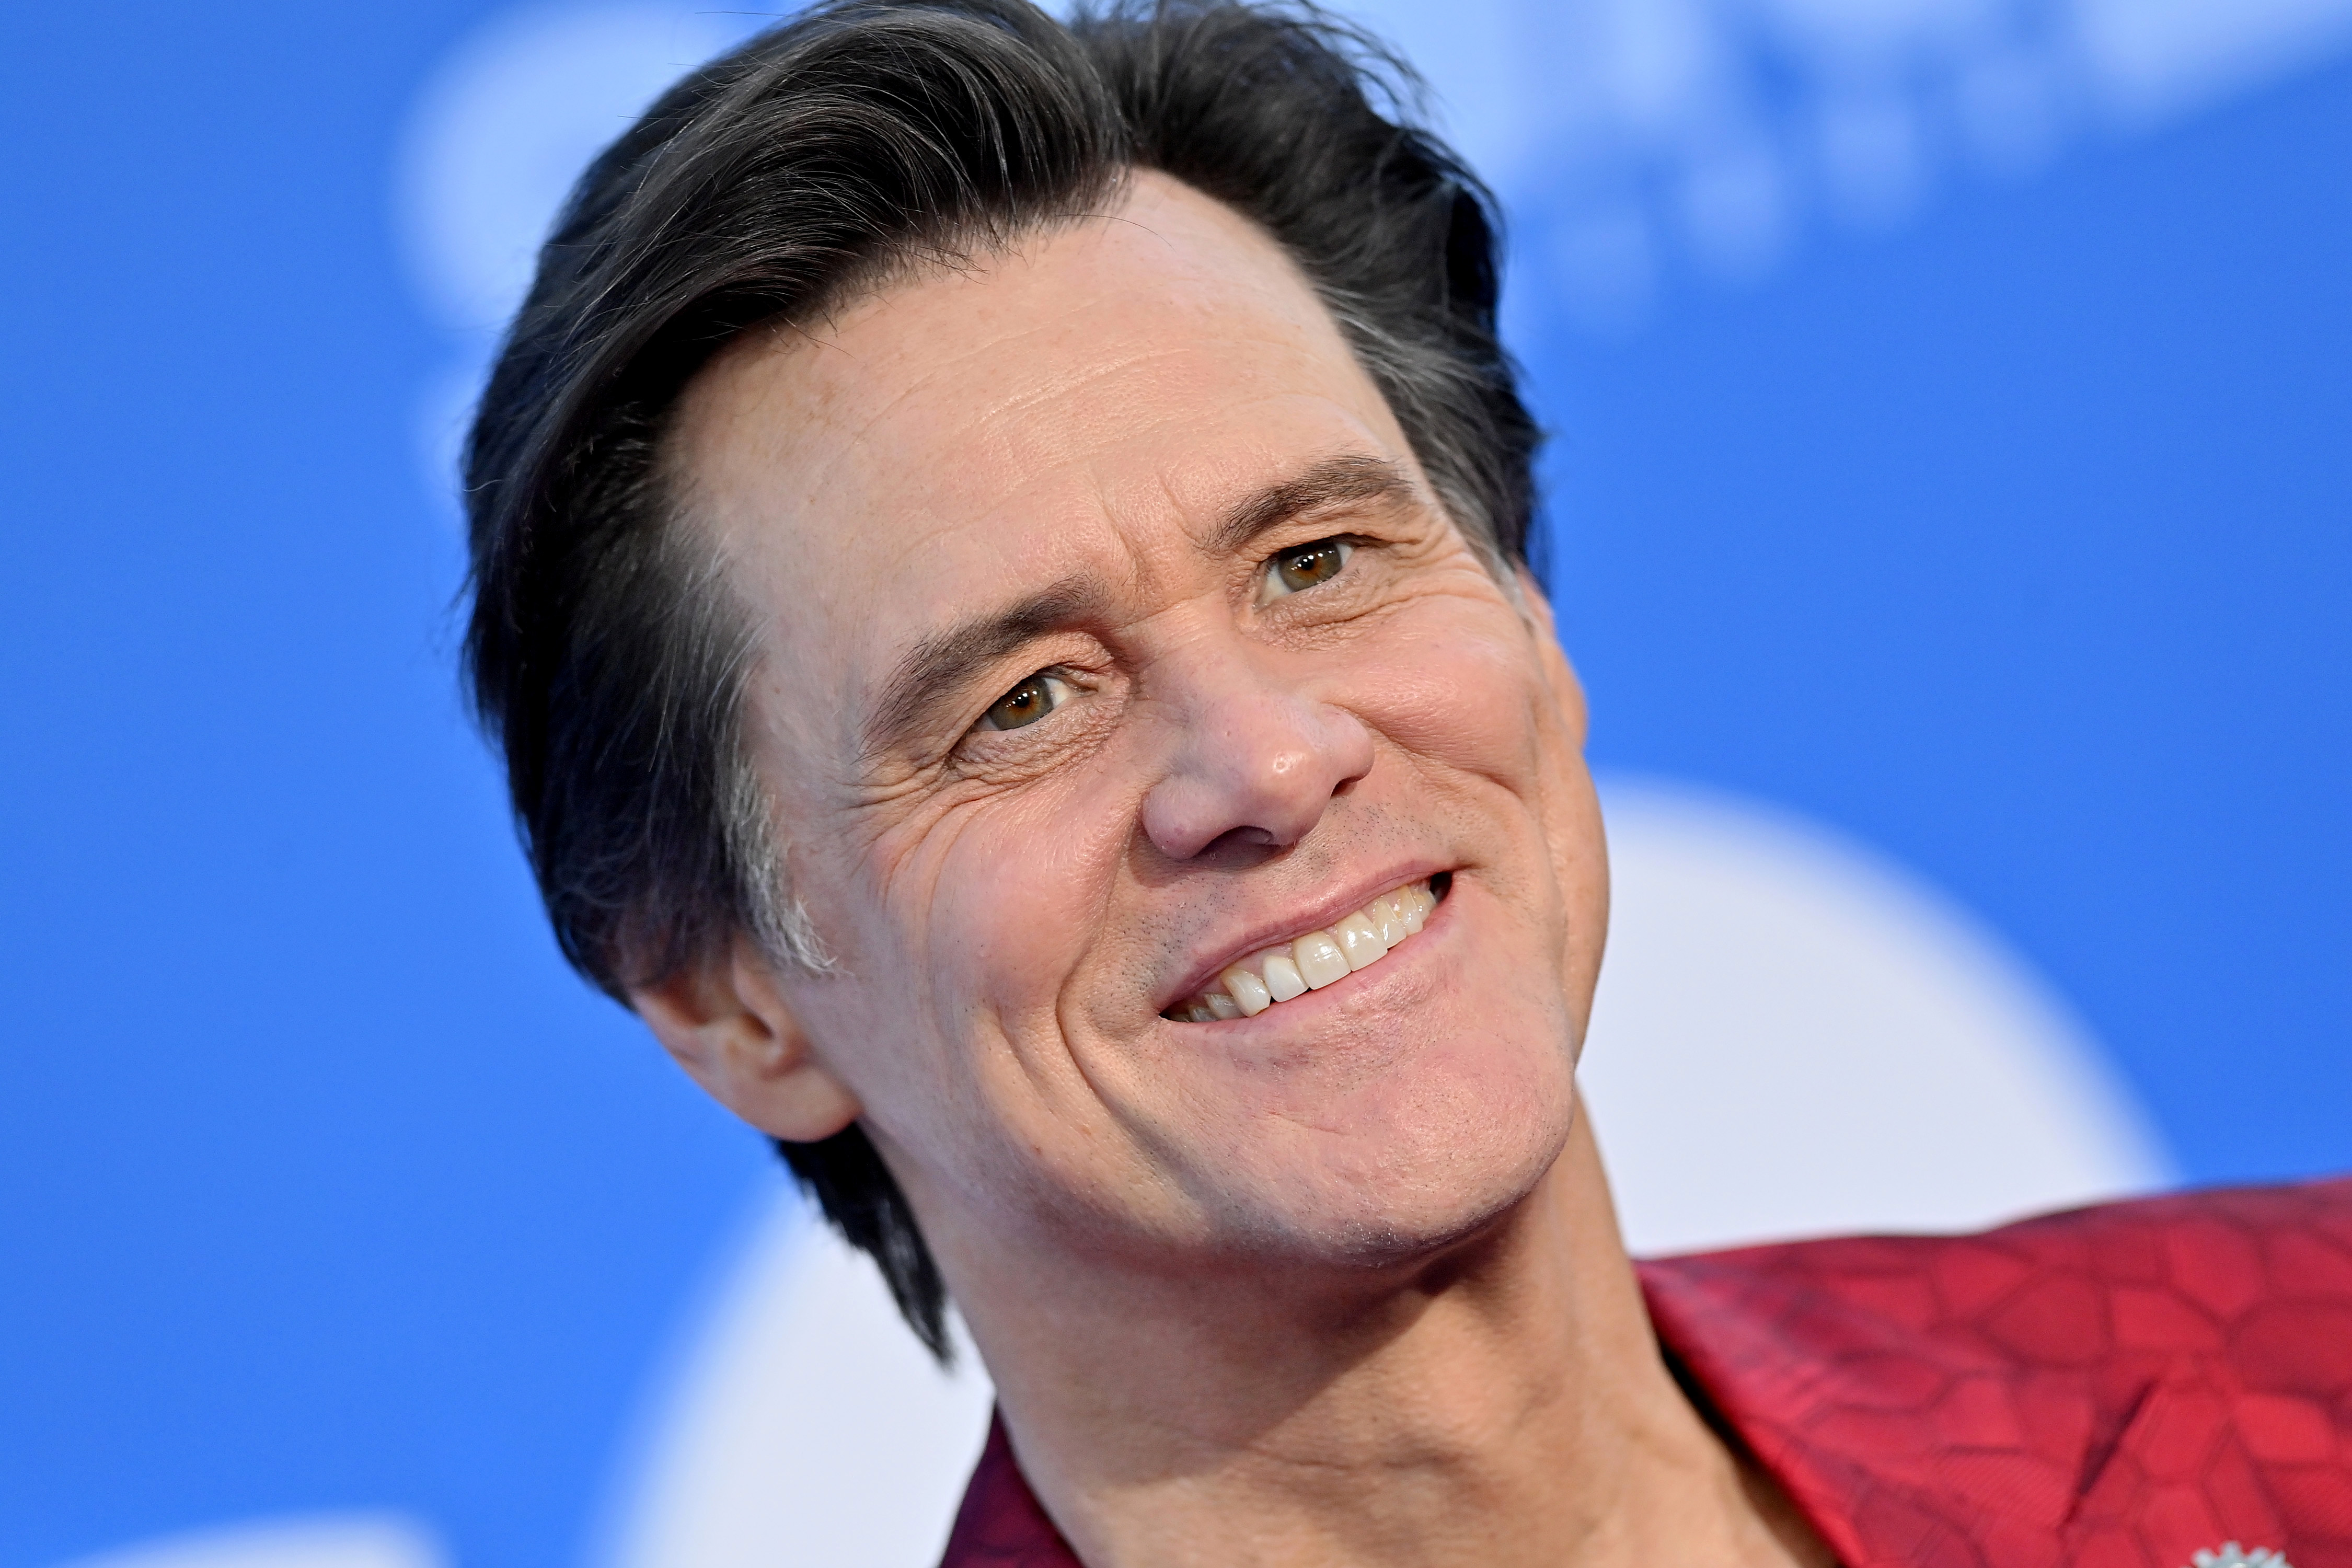 Jim Carrey at the premiere screening of "Sonic The Hedgehog 2" in Los Angeles, California on April 5, 2022 | Source: Getty Images